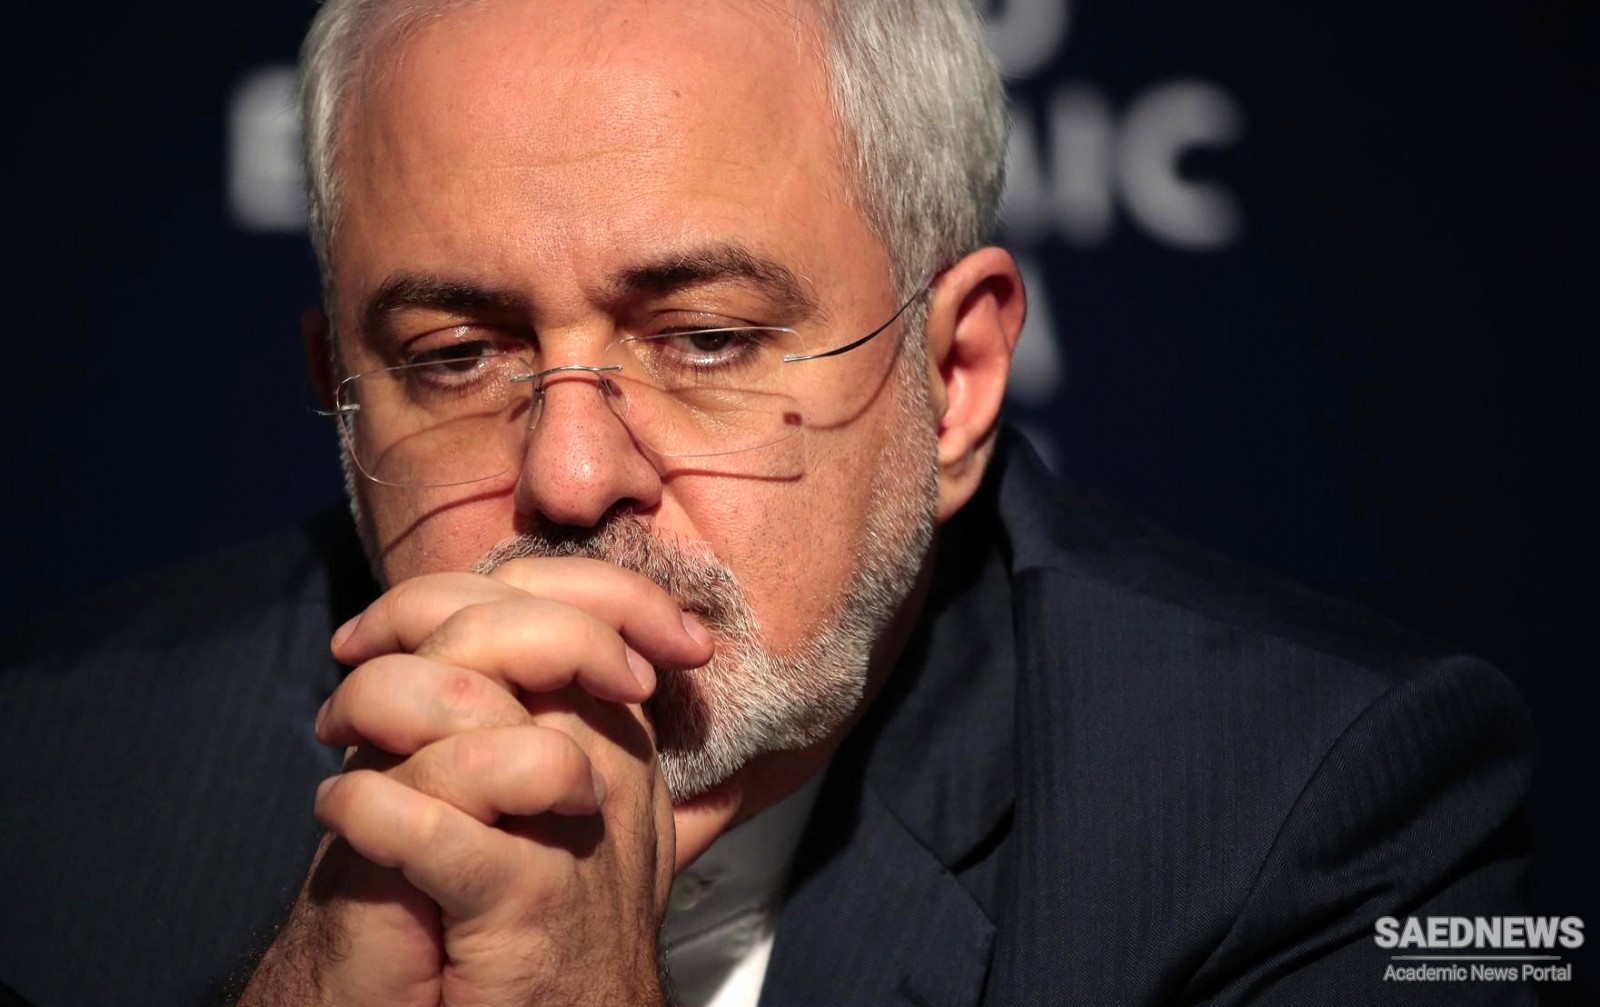 IRI FM Mohammad Javad Zarif Condemns the Assassination of Top Nuclear Scientist